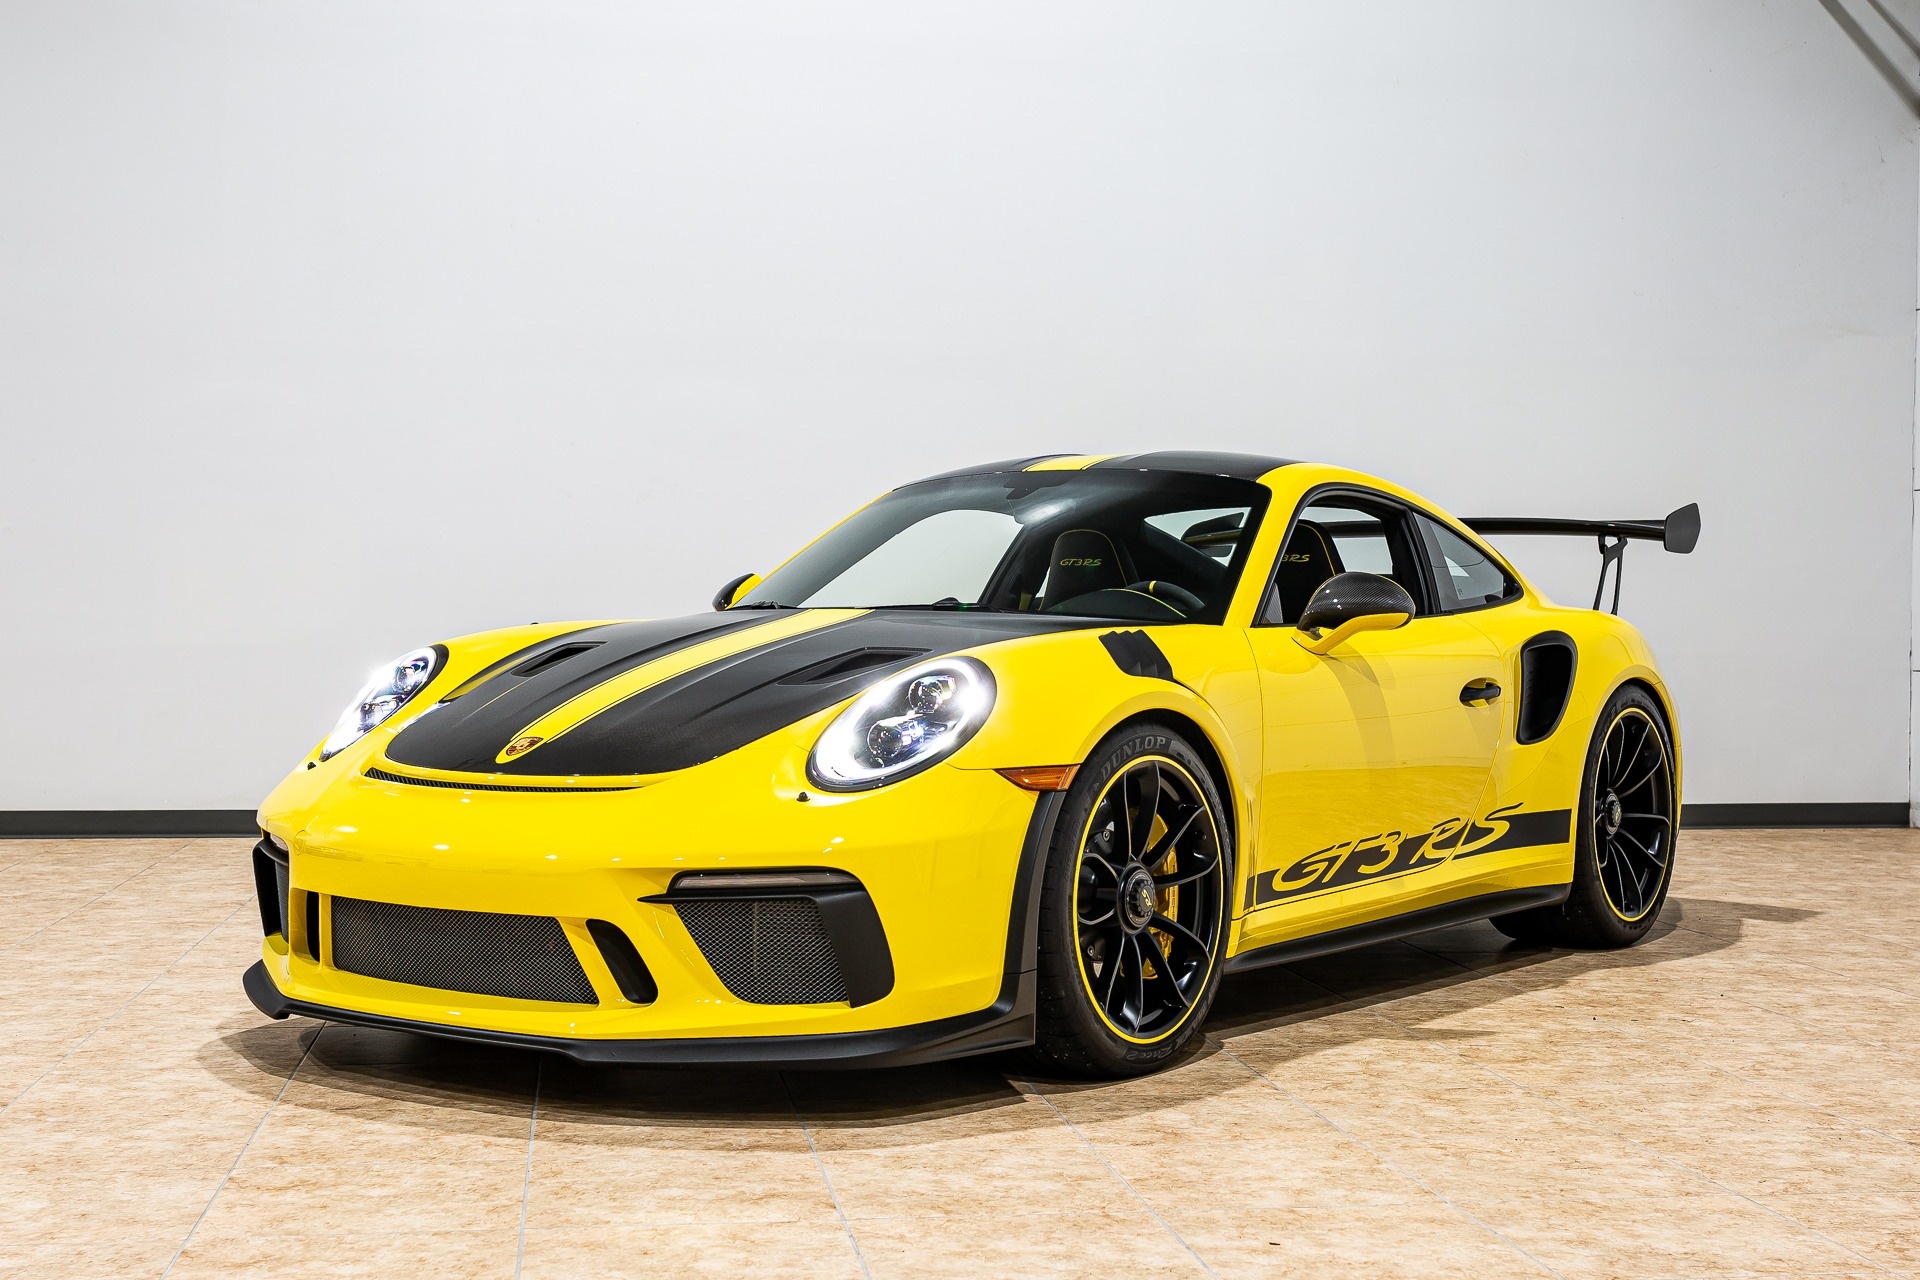 Used 2019 Porsche 911 GT3 RS for sale, High-performance machine, Luxury sports car, Exclusive and powerful, 1920x1280 HD Desktop